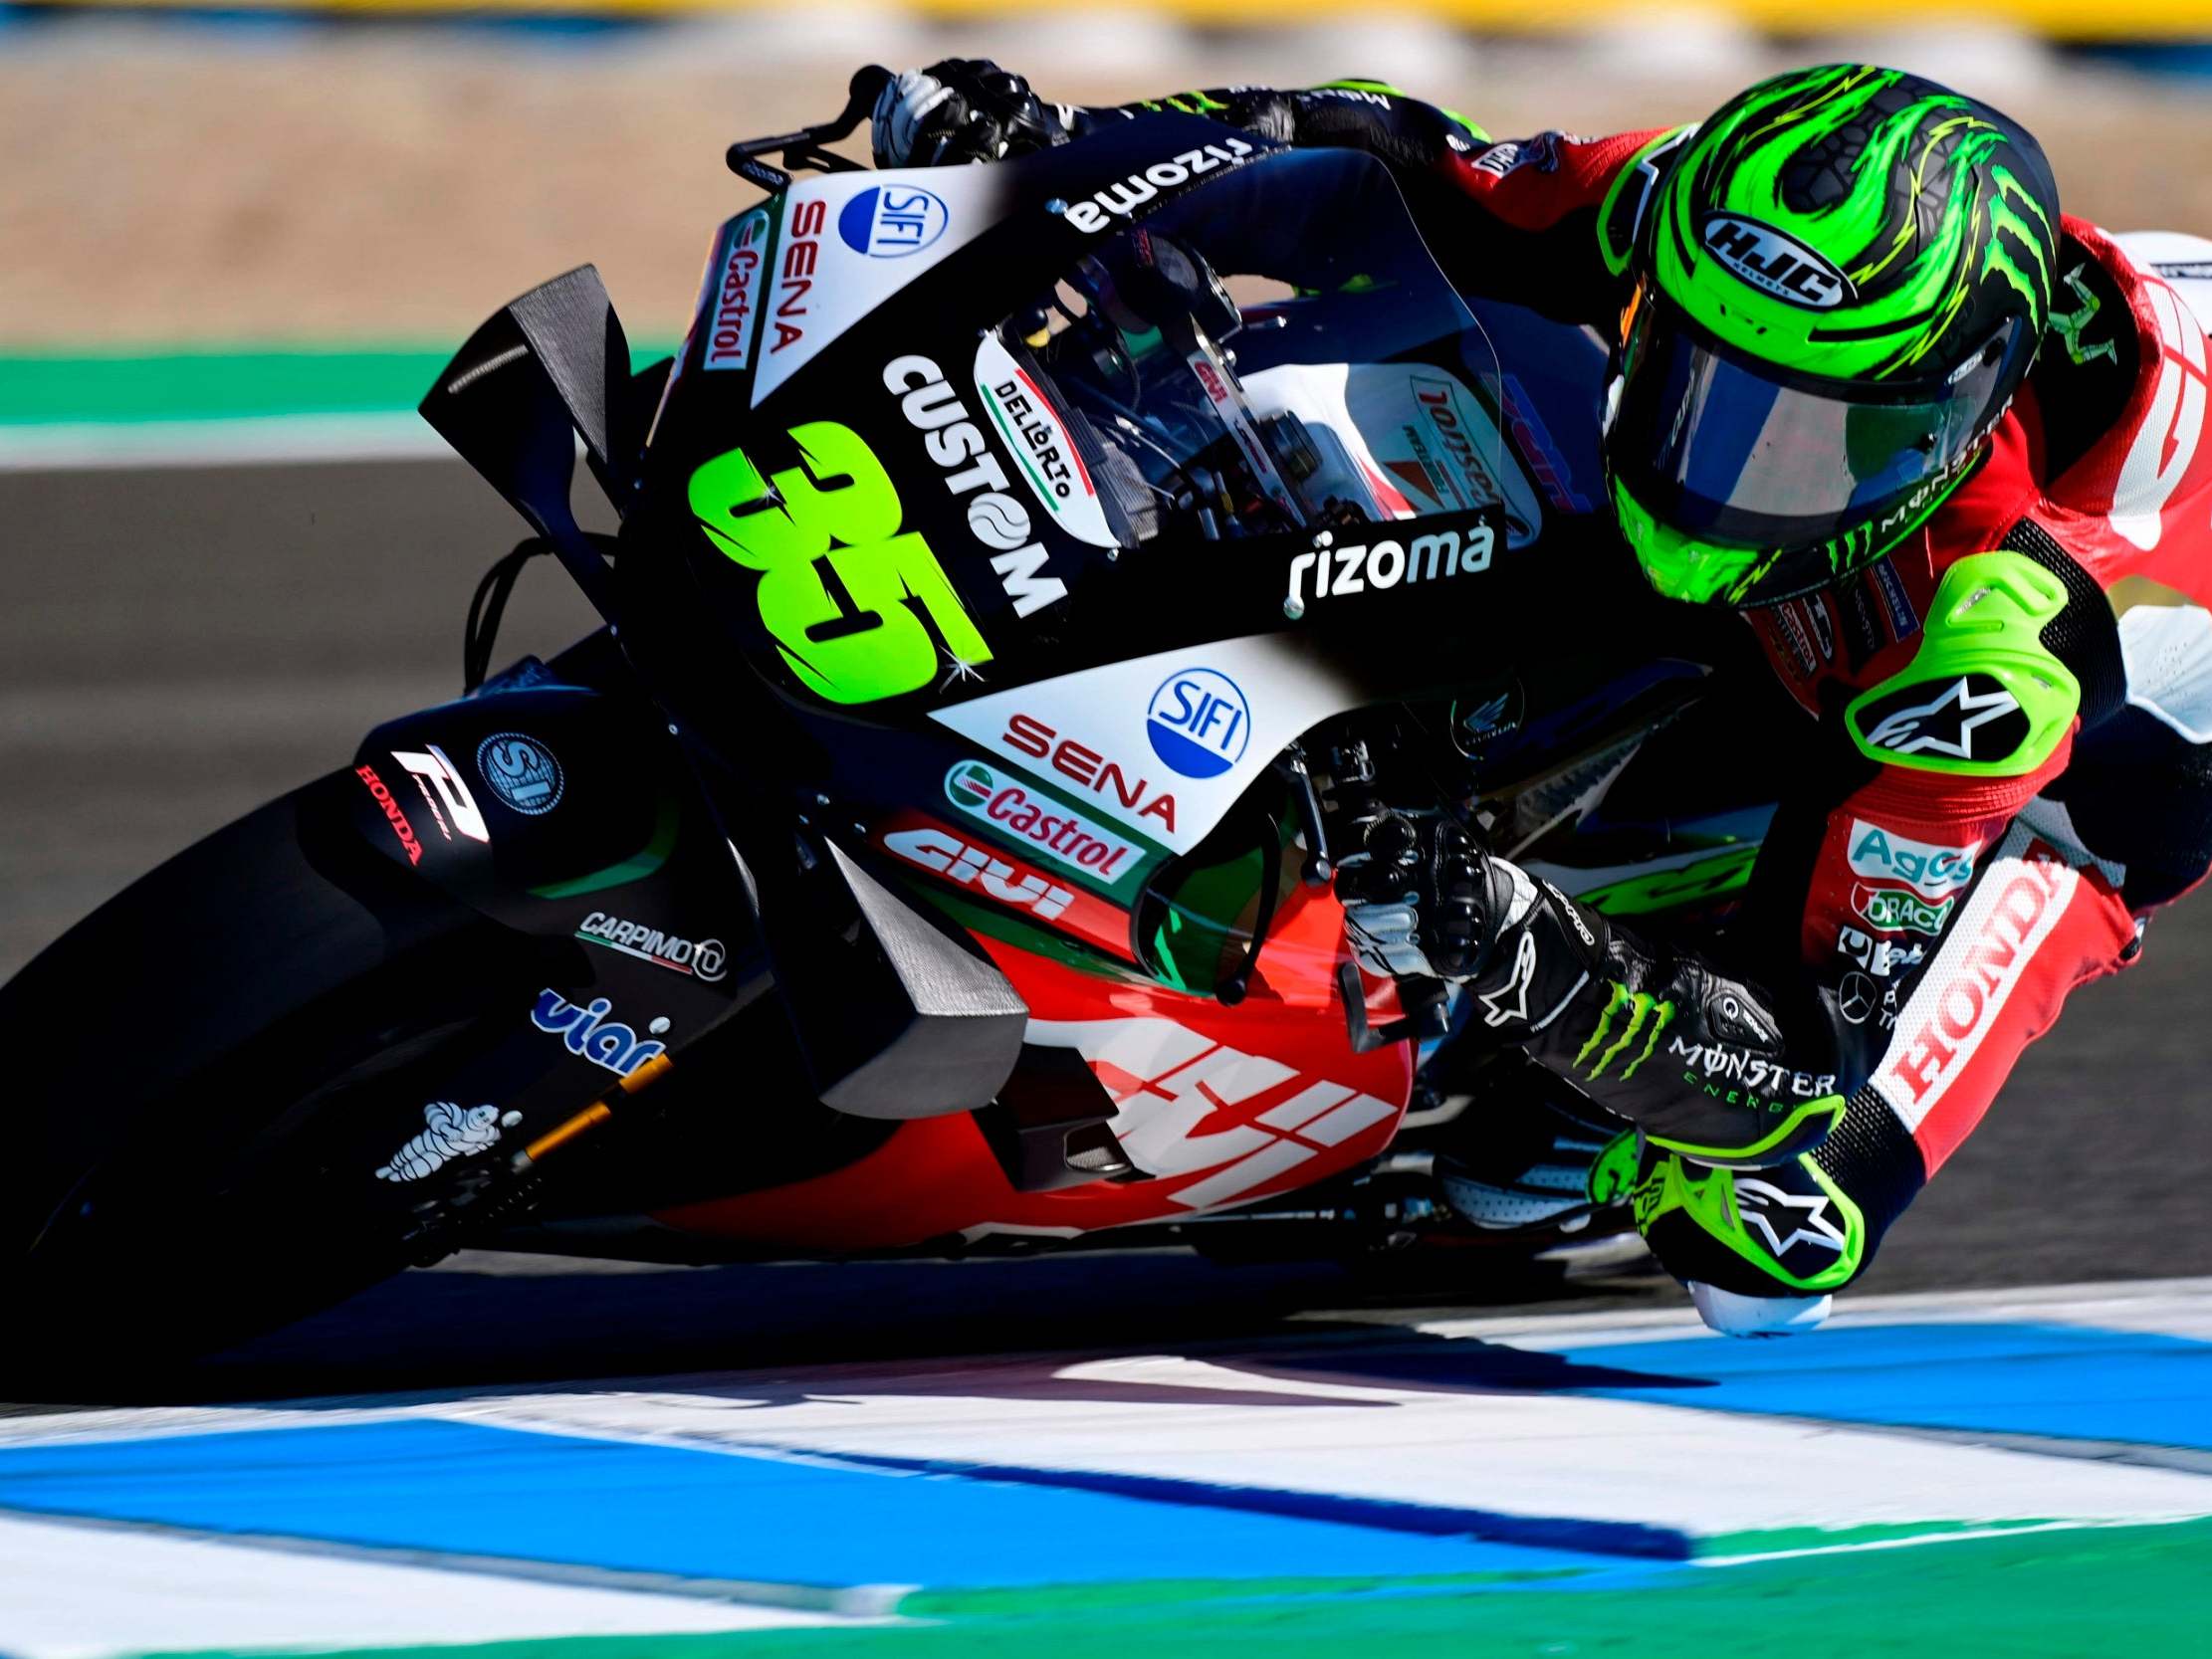 British rider Cal Crutchlow returned to action on Wednesday at Jerez as MotoGP returns